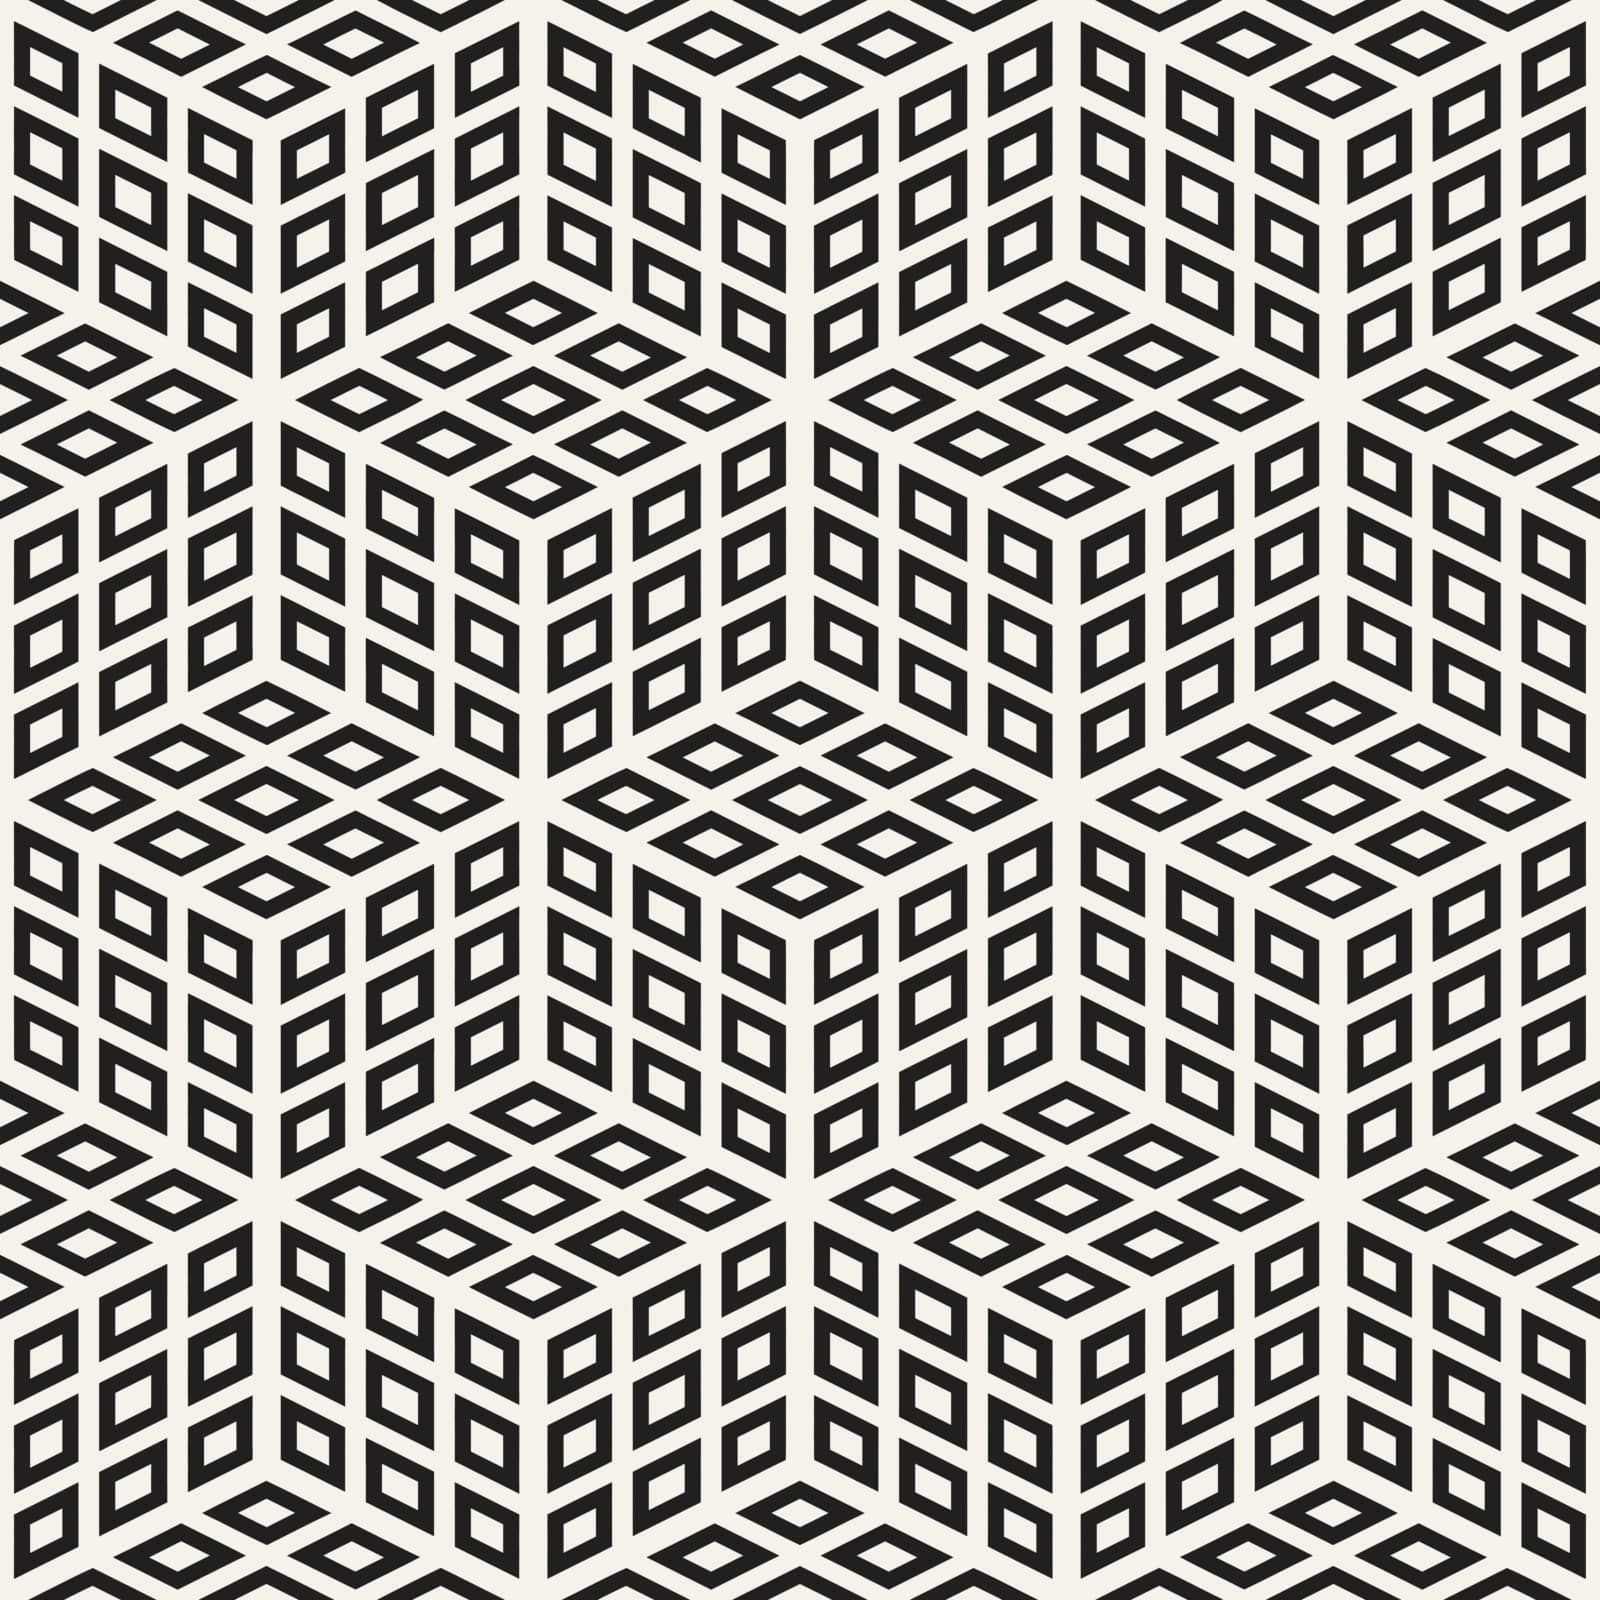 Cubic Grid Tiling Endless Stylish Texture. Vector Seamless Black and White Pattern by Samolevsky